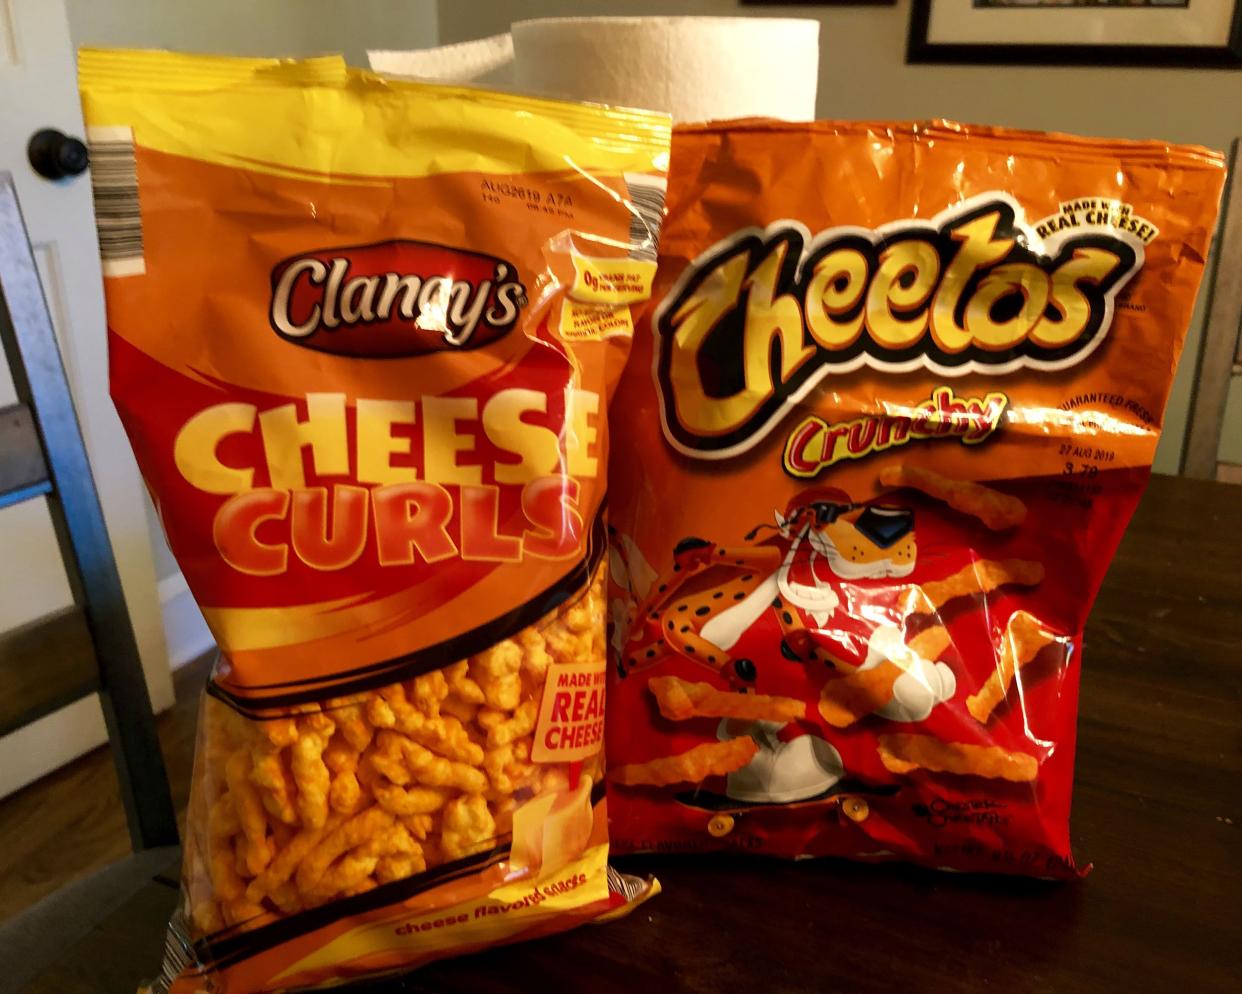 bags of cheetos and aldi brand cheese curls